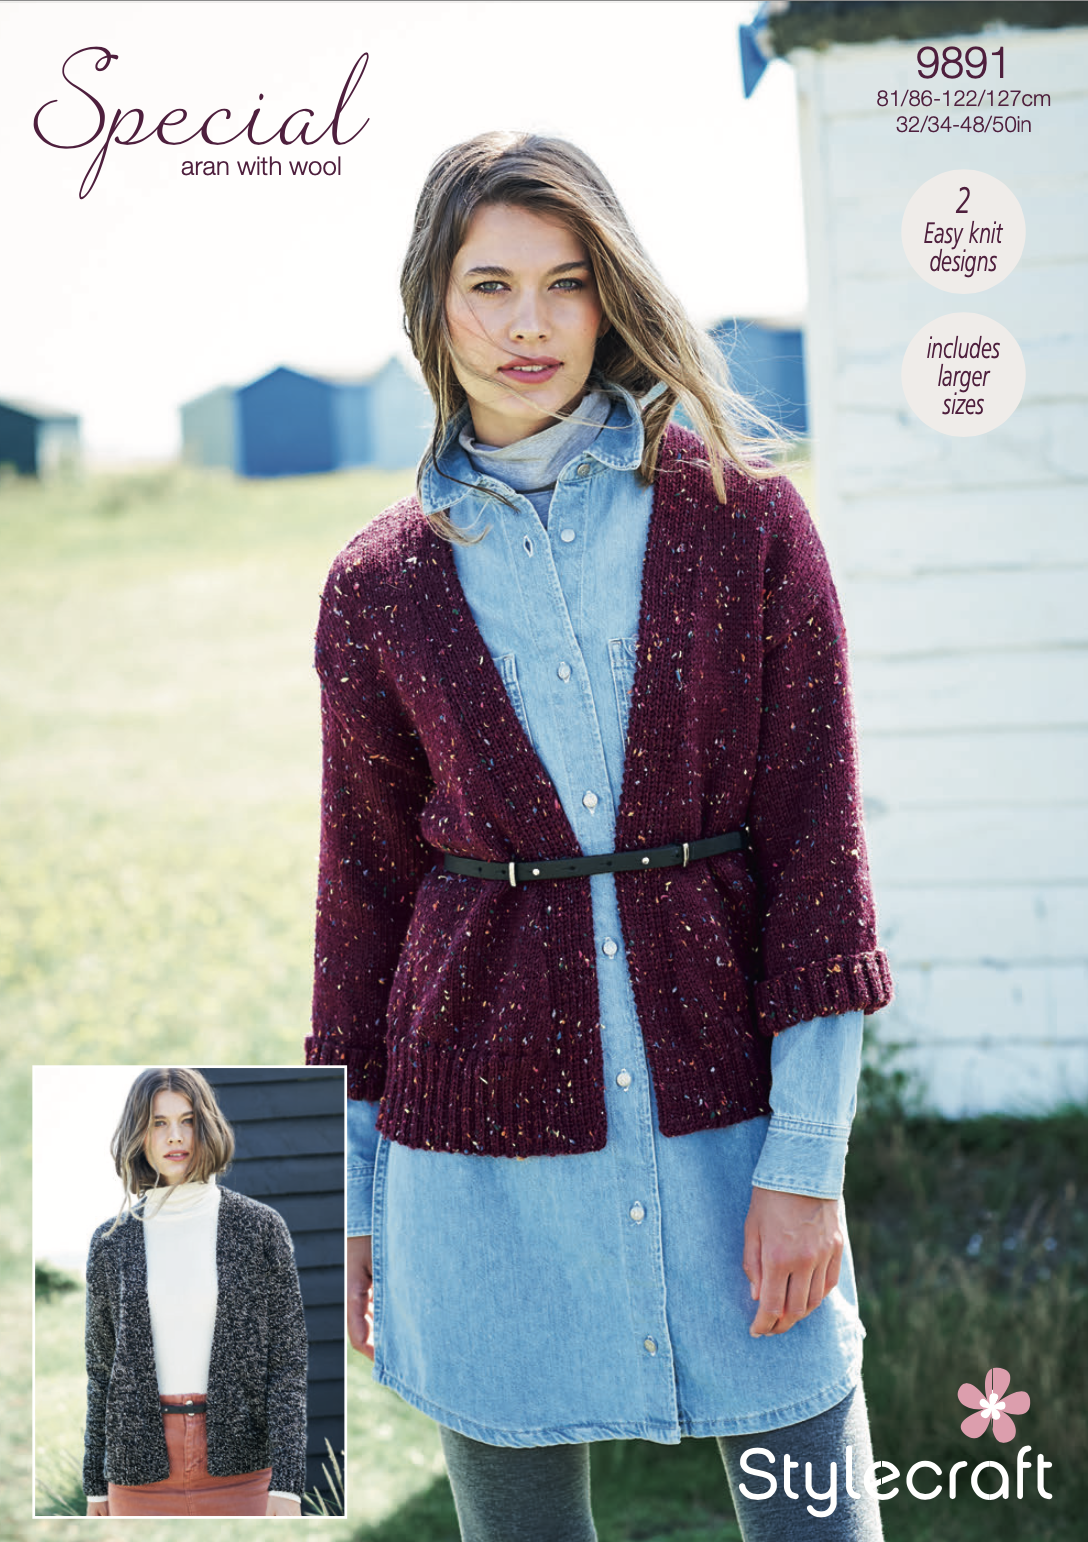 Stylecraft Pattern Special Aran With Wool 9891 (download) product image